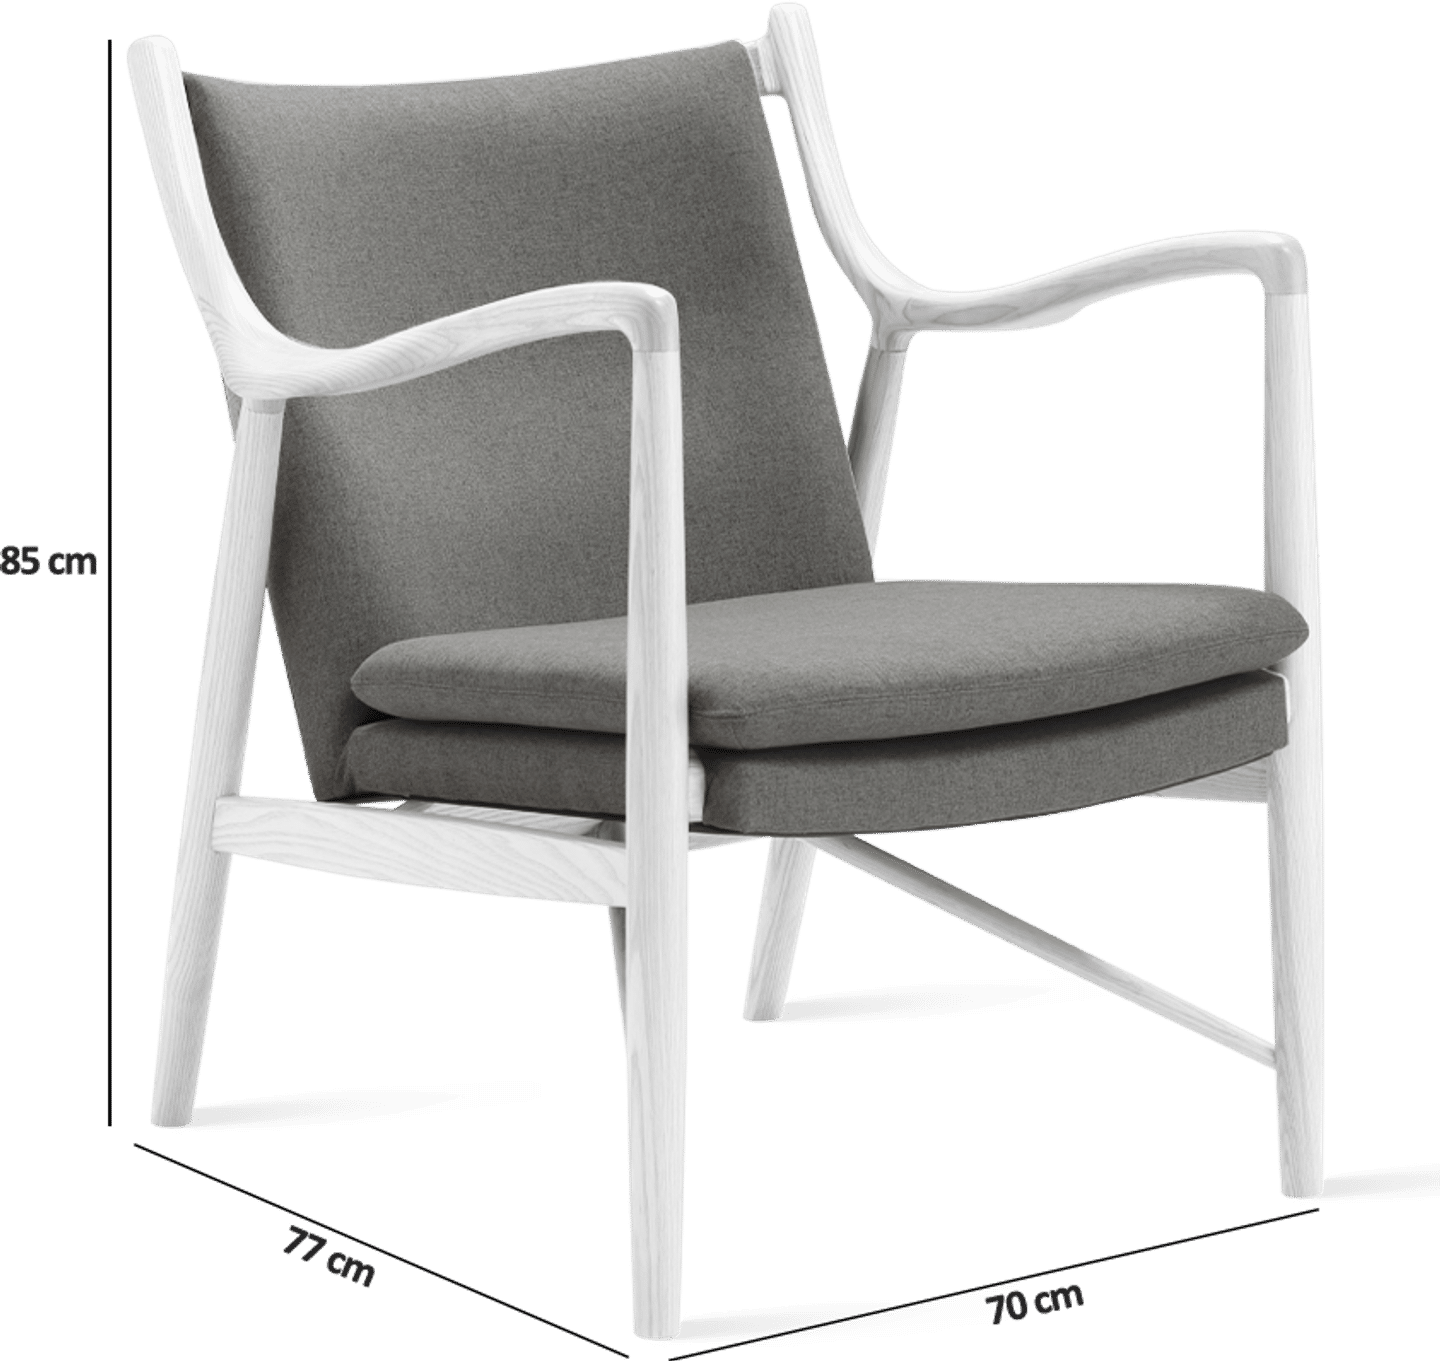 No. 45 Chair Charcoal Grey /Fabric/Solid Ash  image.